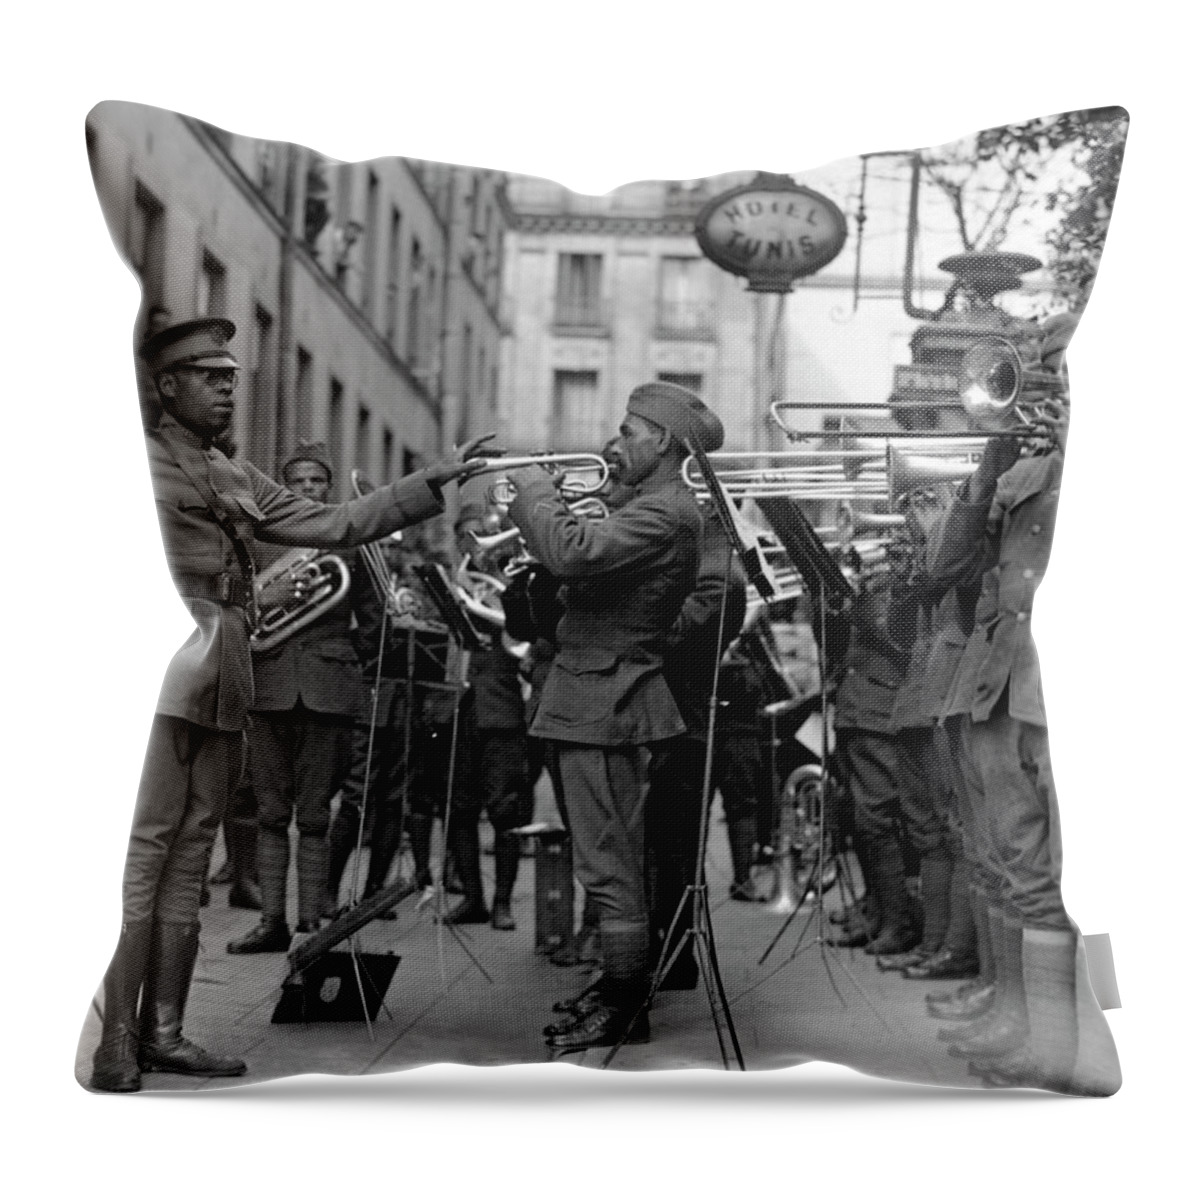 1910s Throw Pillow featuring the photograph Jazz For Wounded Soldiers by Underwood Archives